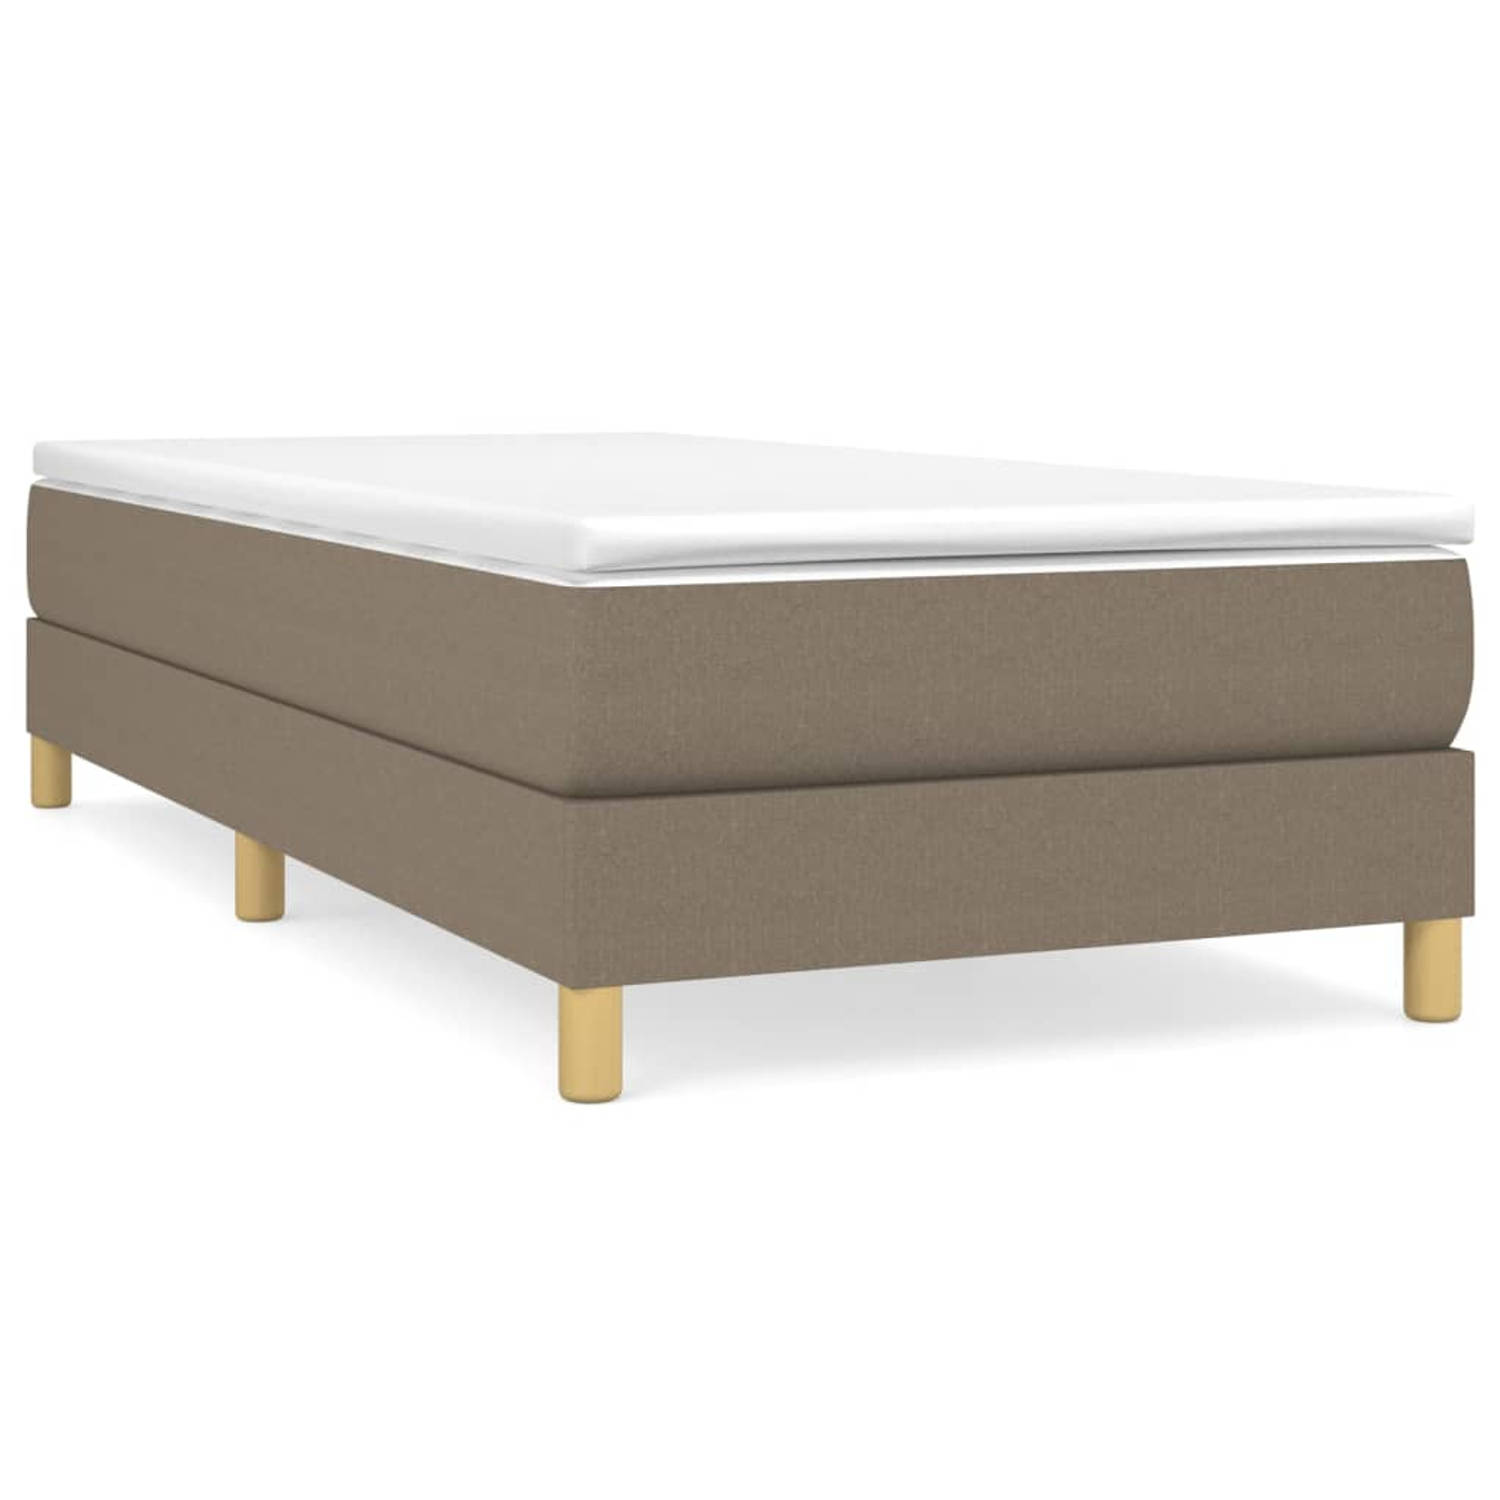 The Living Store Boxspringframe stof taupe 80x200 cm - Boxspringframe - Boxspringframes - Bed - Ledikant - Slaapmeubel - Bedframe - Bedbodem - Eenpersoonsbed - Boxspring - Bedden -